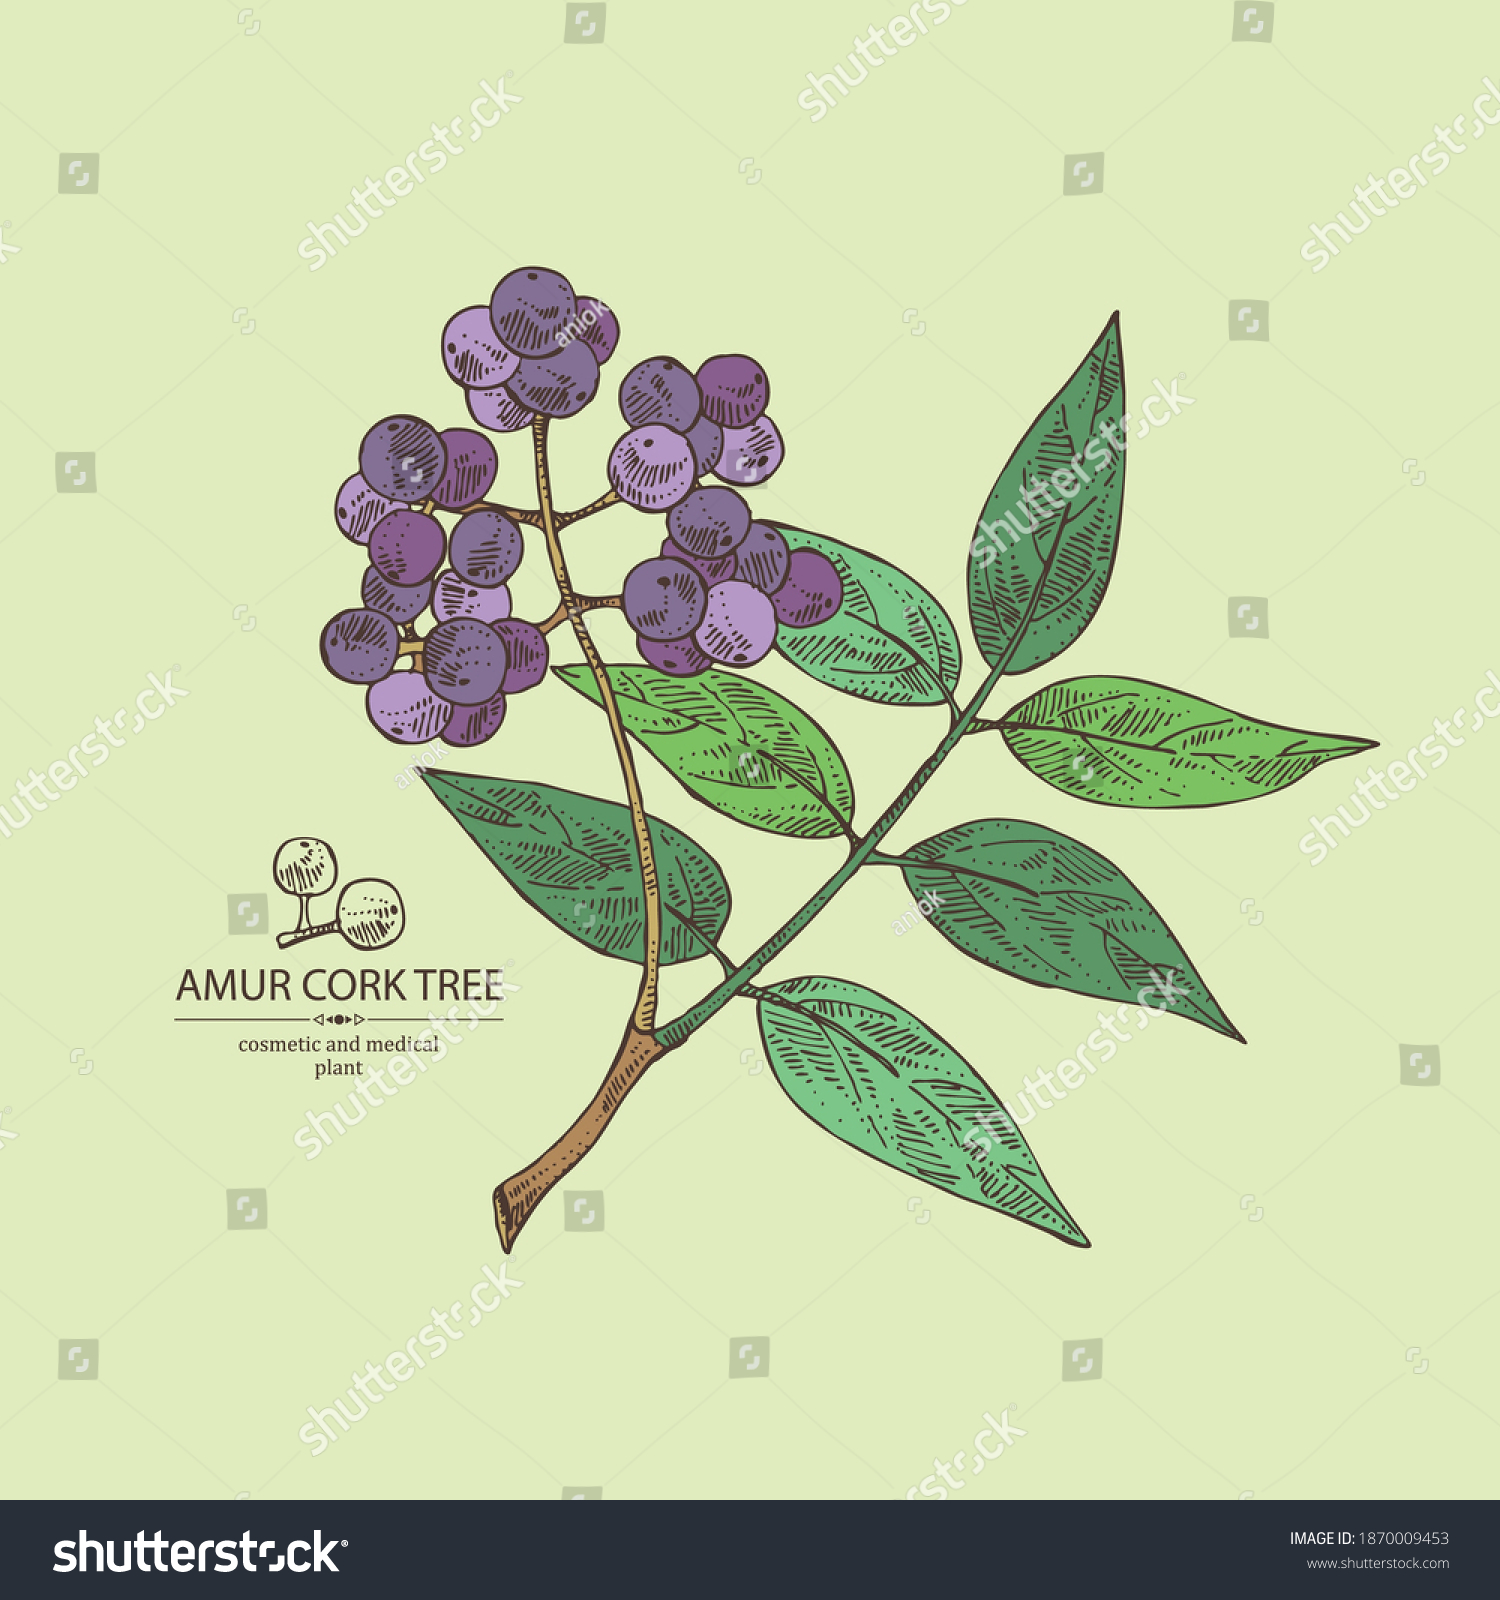 SVG of Background with amur cork tree: amur cork berries, plant and amur cork tree bark. Phellodendron amurense. Cosmetic and medical plant. Vector hand drawn illustration svg